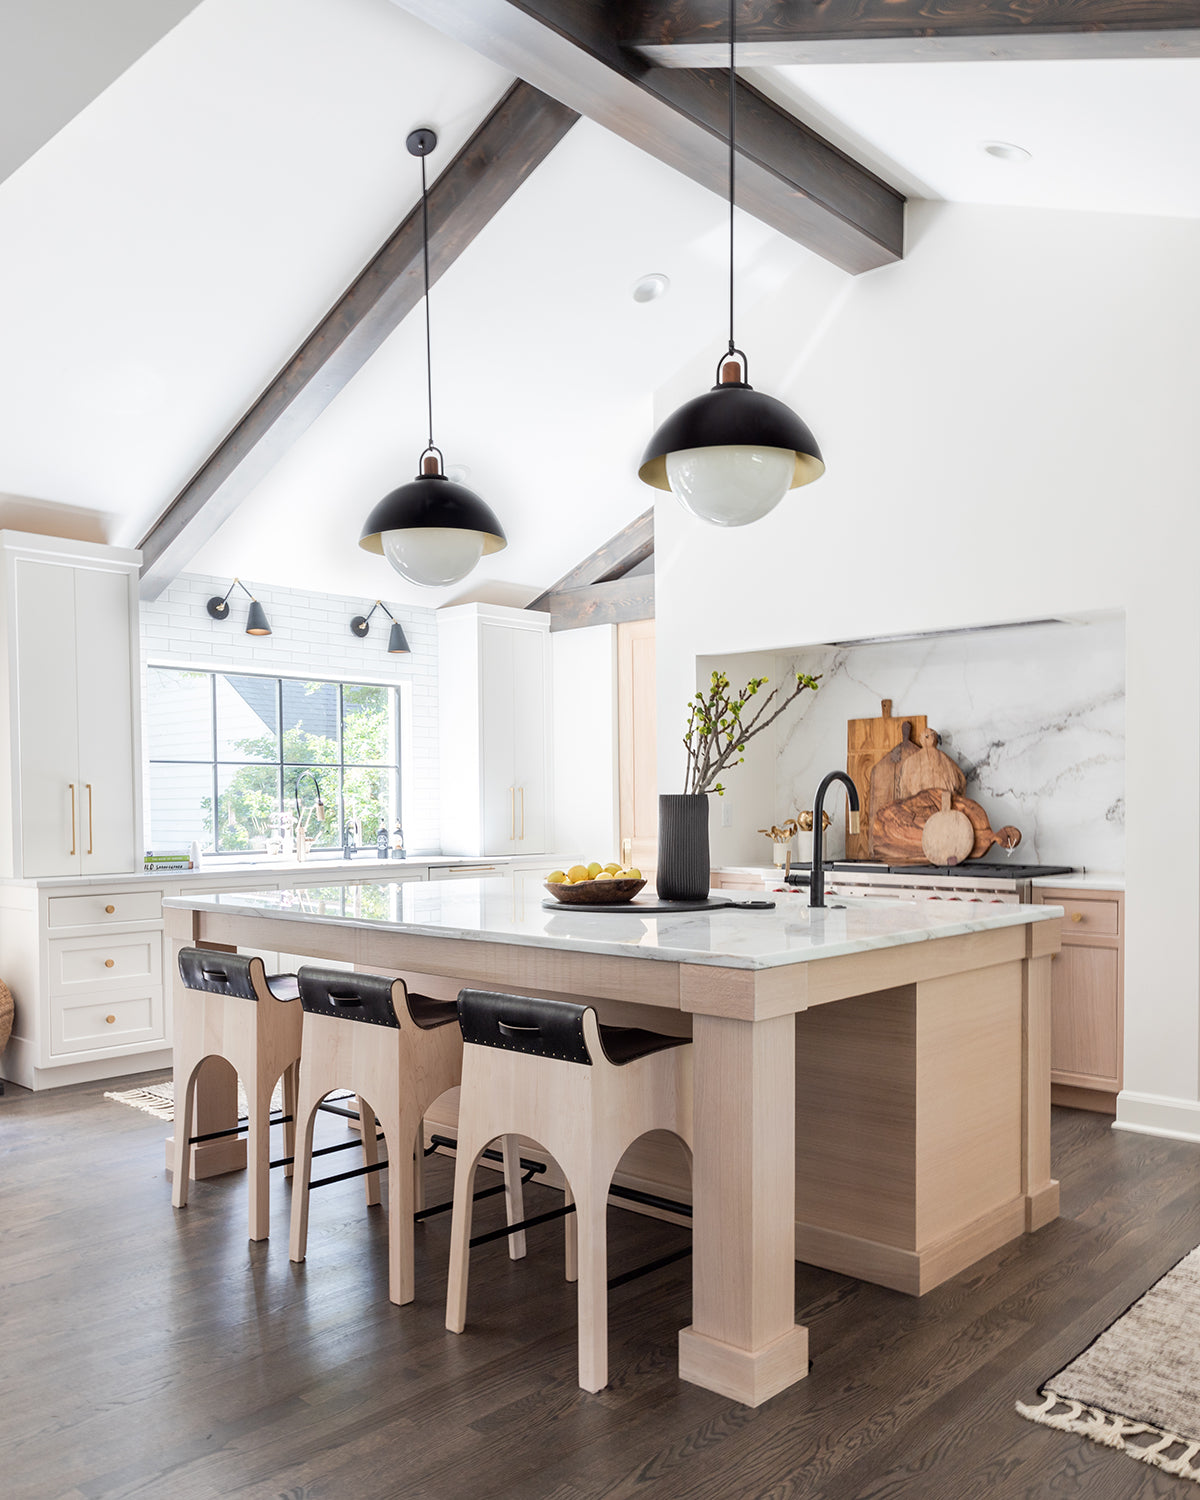 Black leather Jack counter stools from Lostine at a kitchen island in large white kitchen with vaulted ceiling.